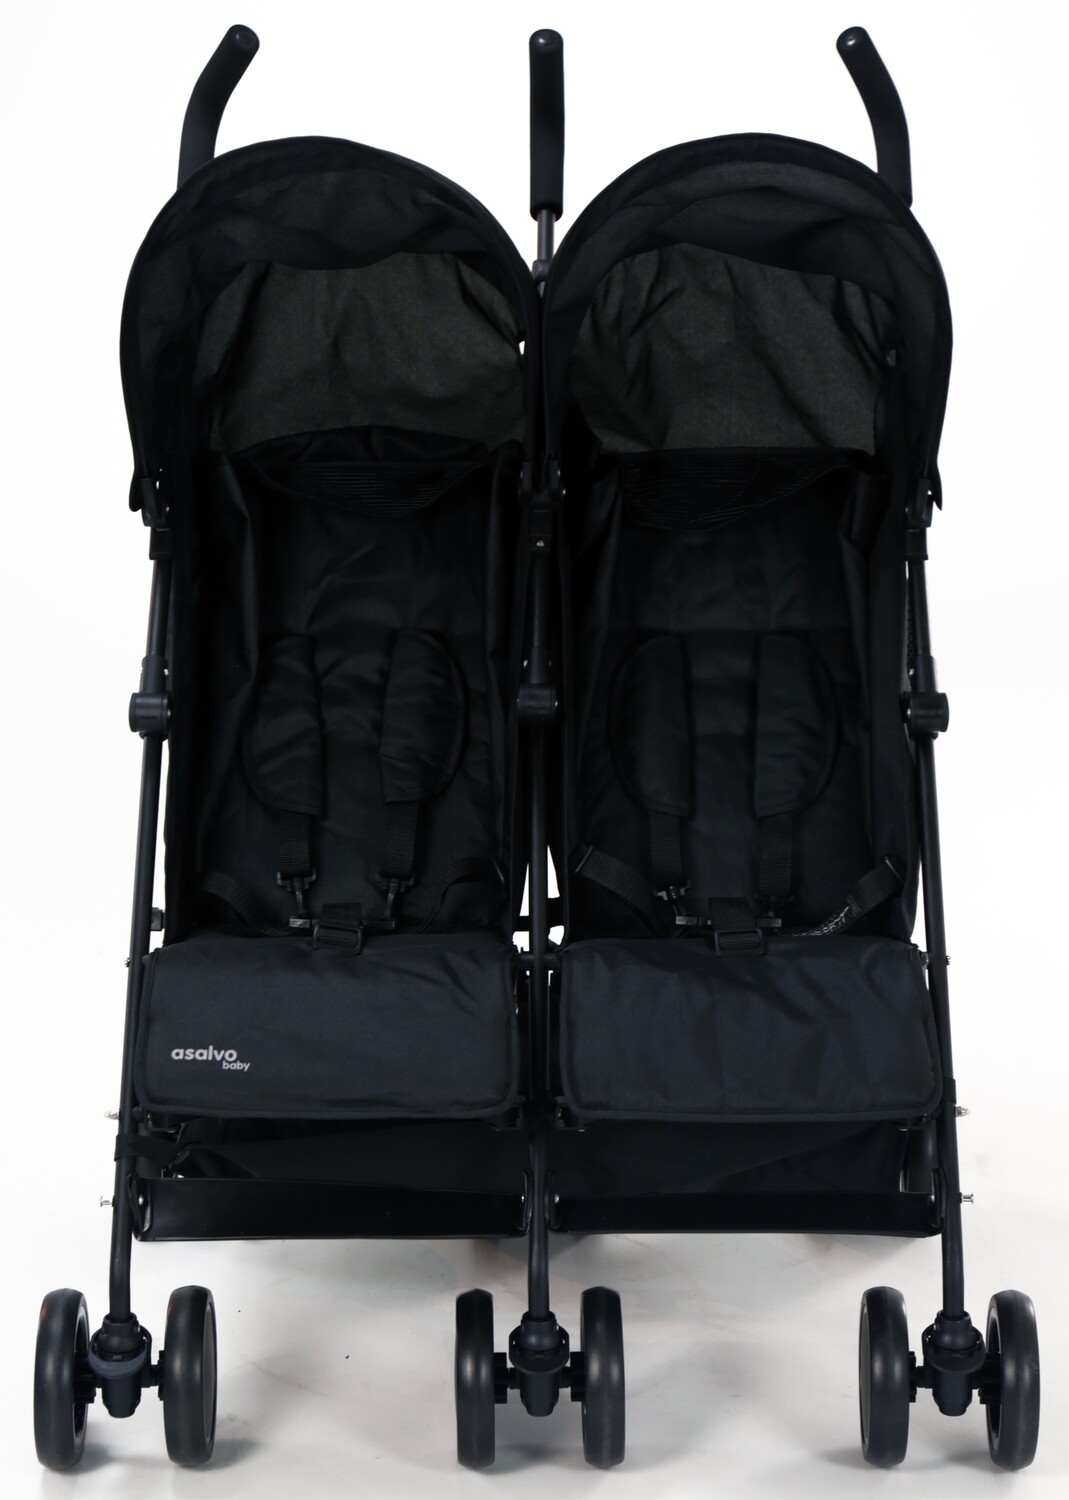 River Double Stroller for Twin Babies - Black